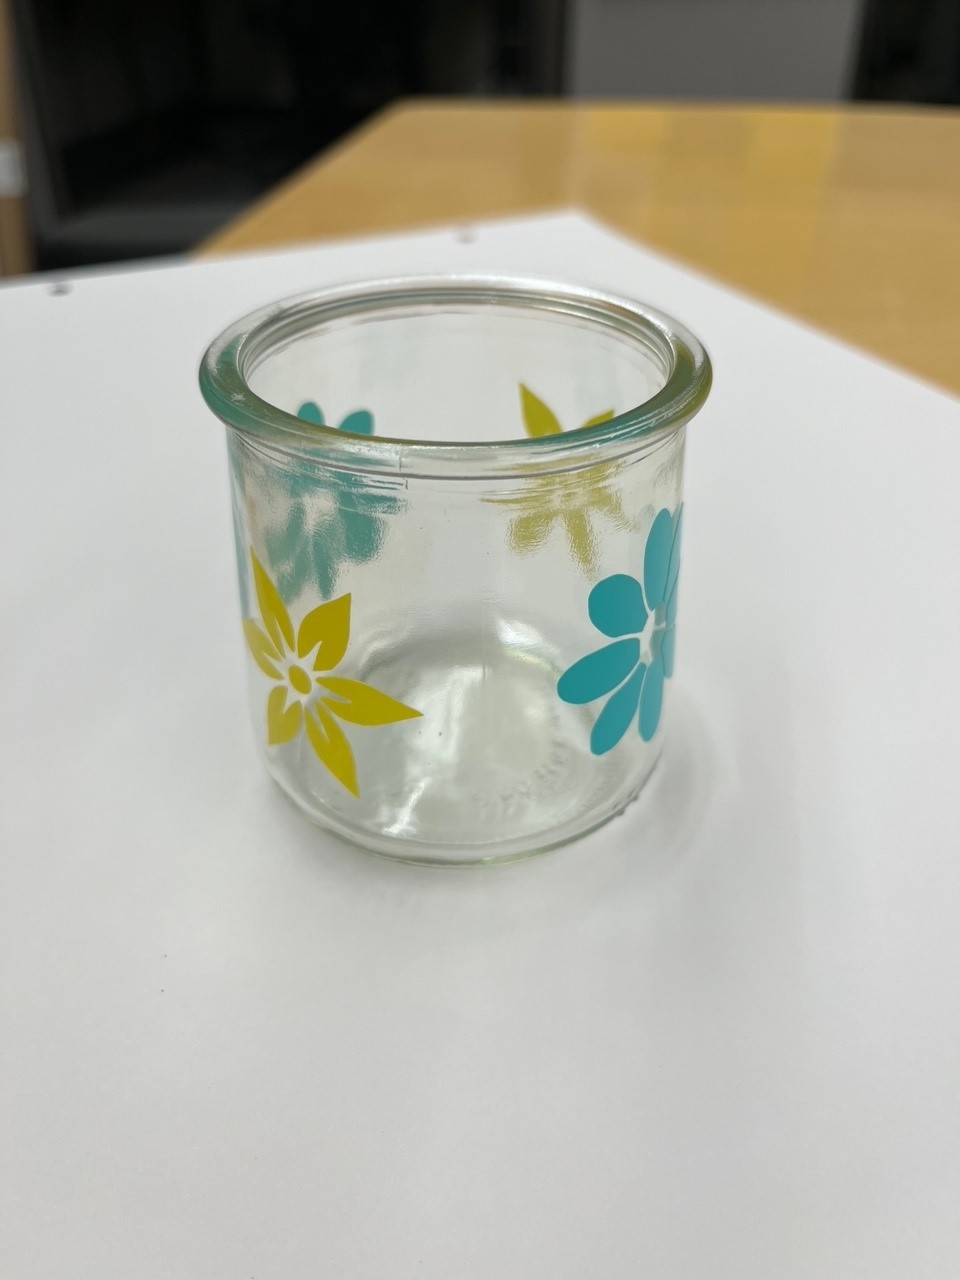 small glass jar with yellow and teal vinyl flower stickers on it